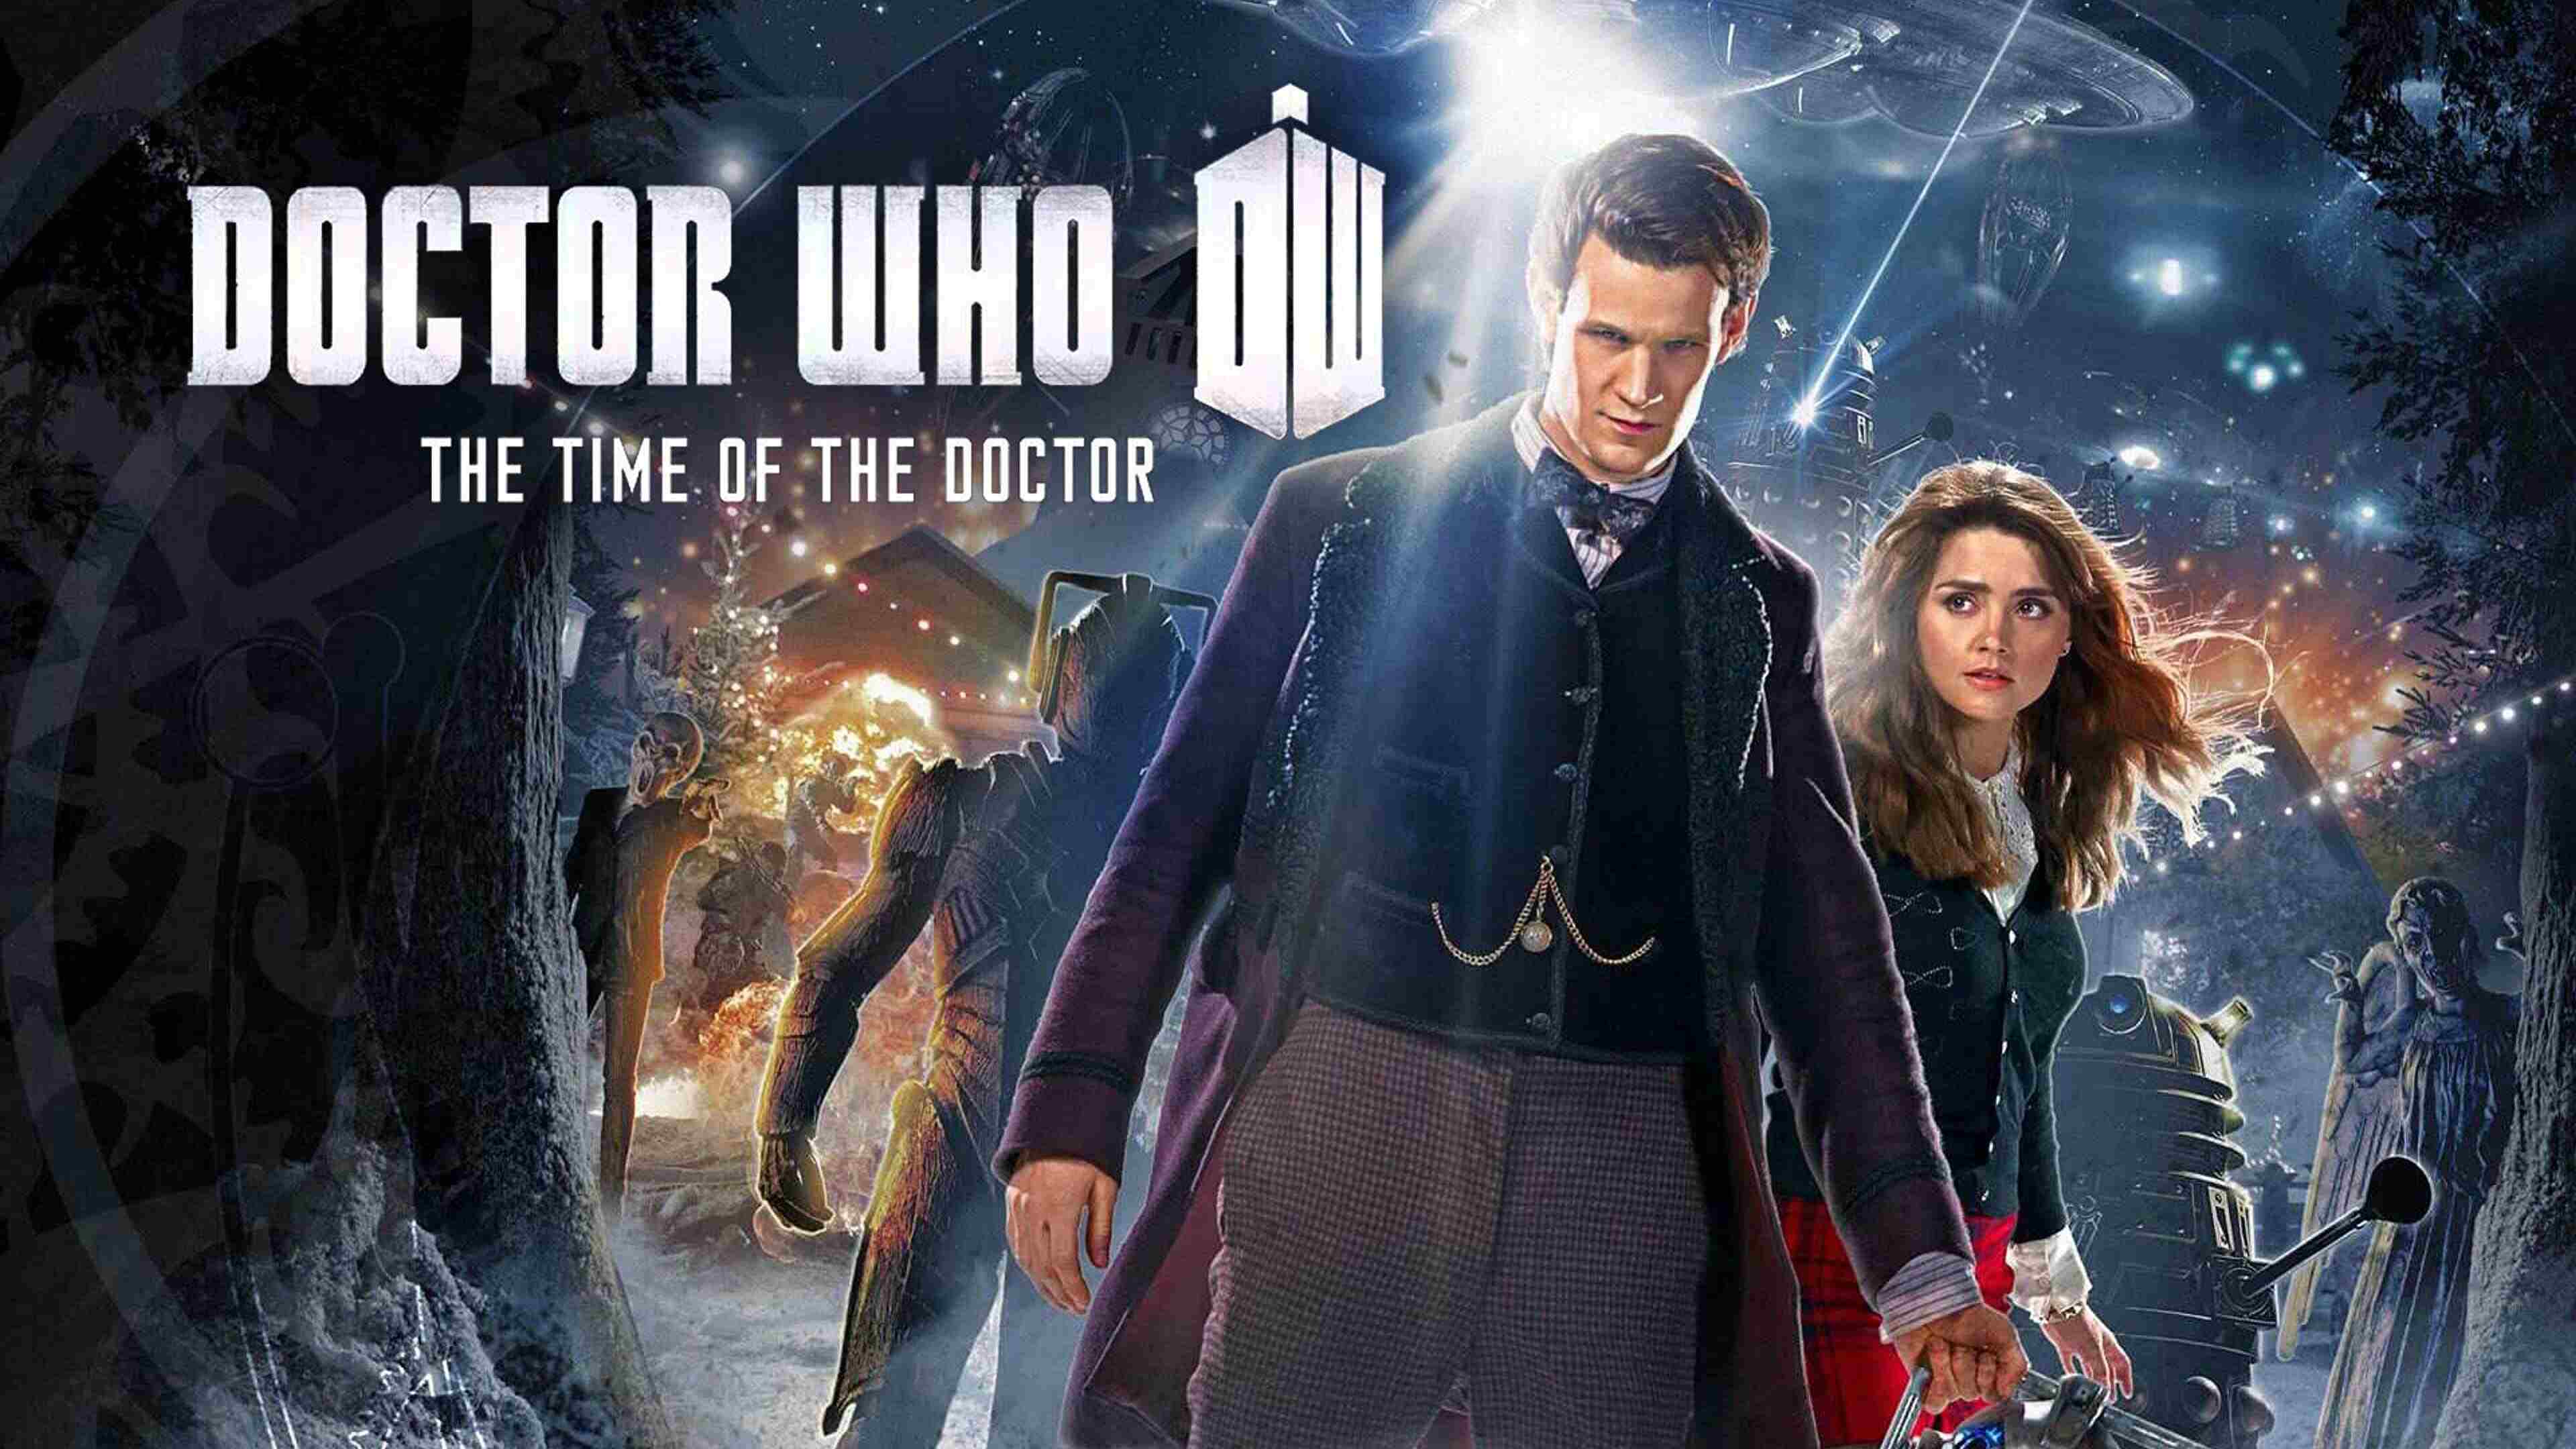 35-facts-about-the-movie-doctor-who-the-day-of-the-doctor